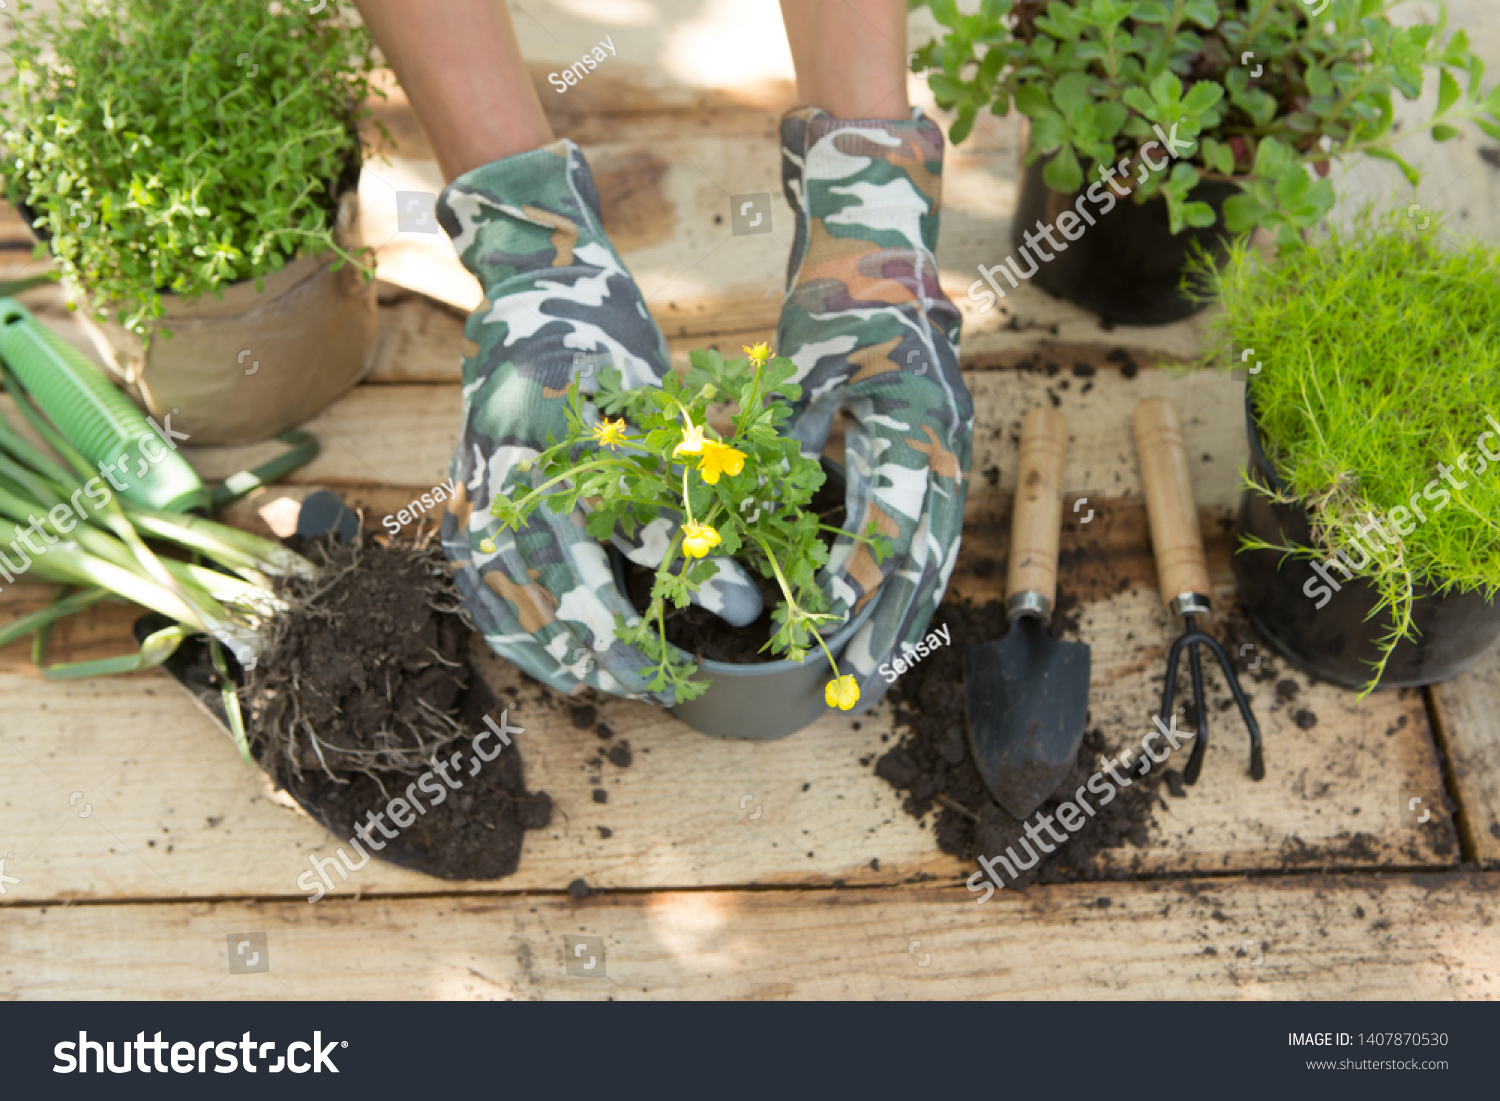 Seedlings, plants in pots and garden tools on the wooden table, green trees blurred background - gardening concept #1407870530